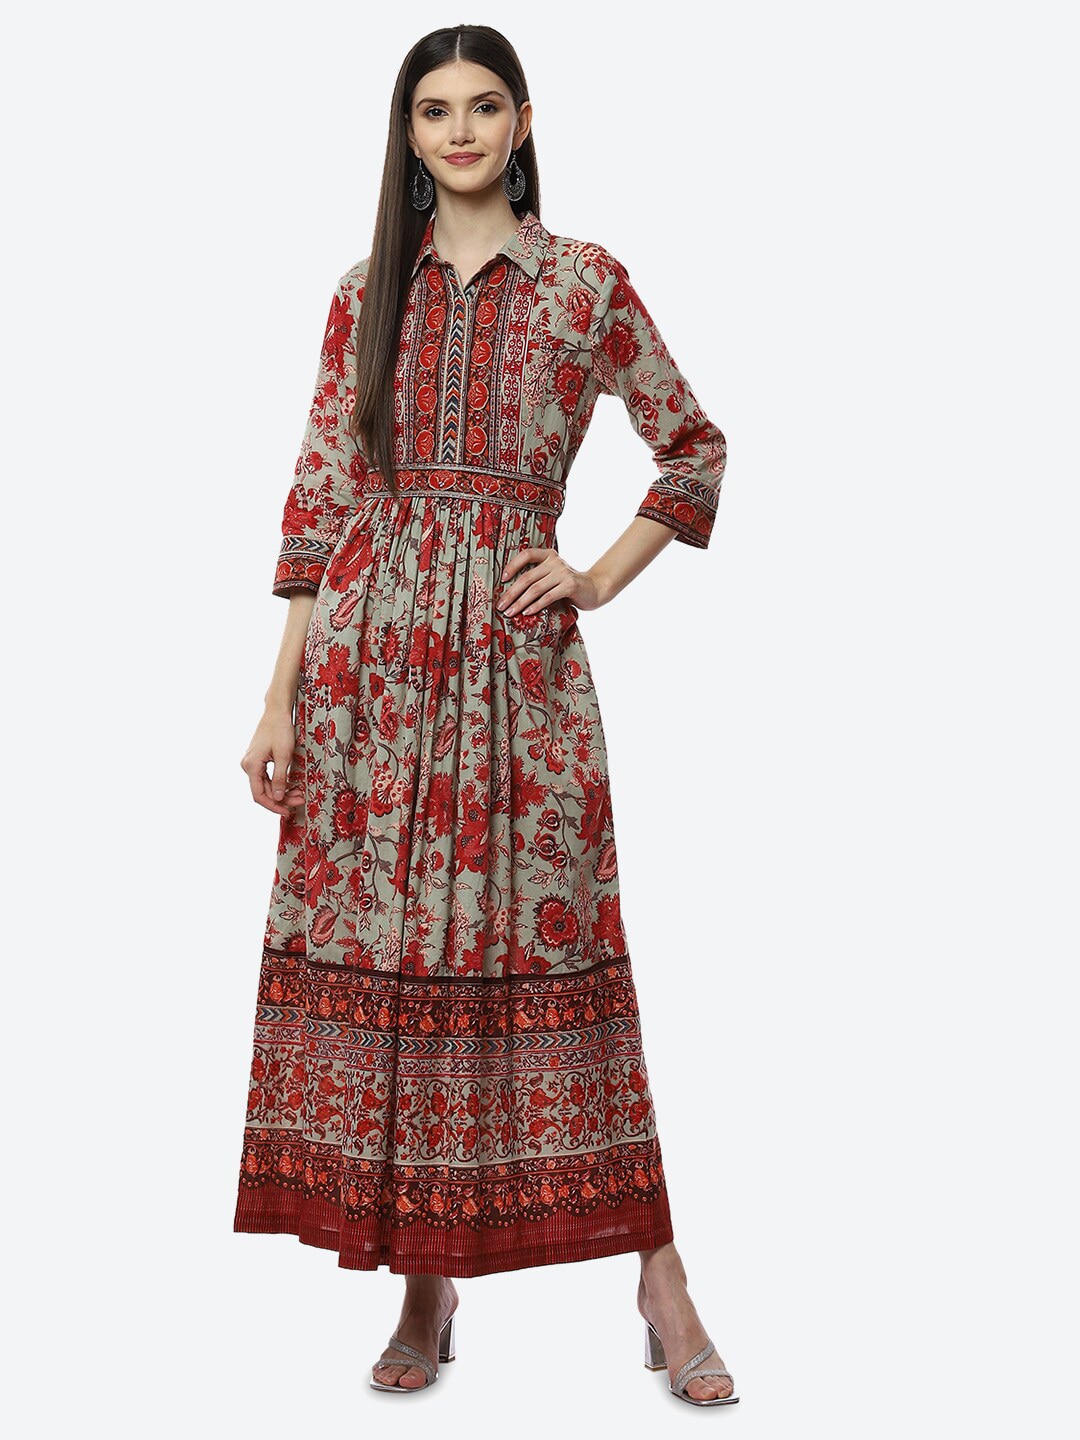 Biba Green & Red Floral Maxi Dress Price in India